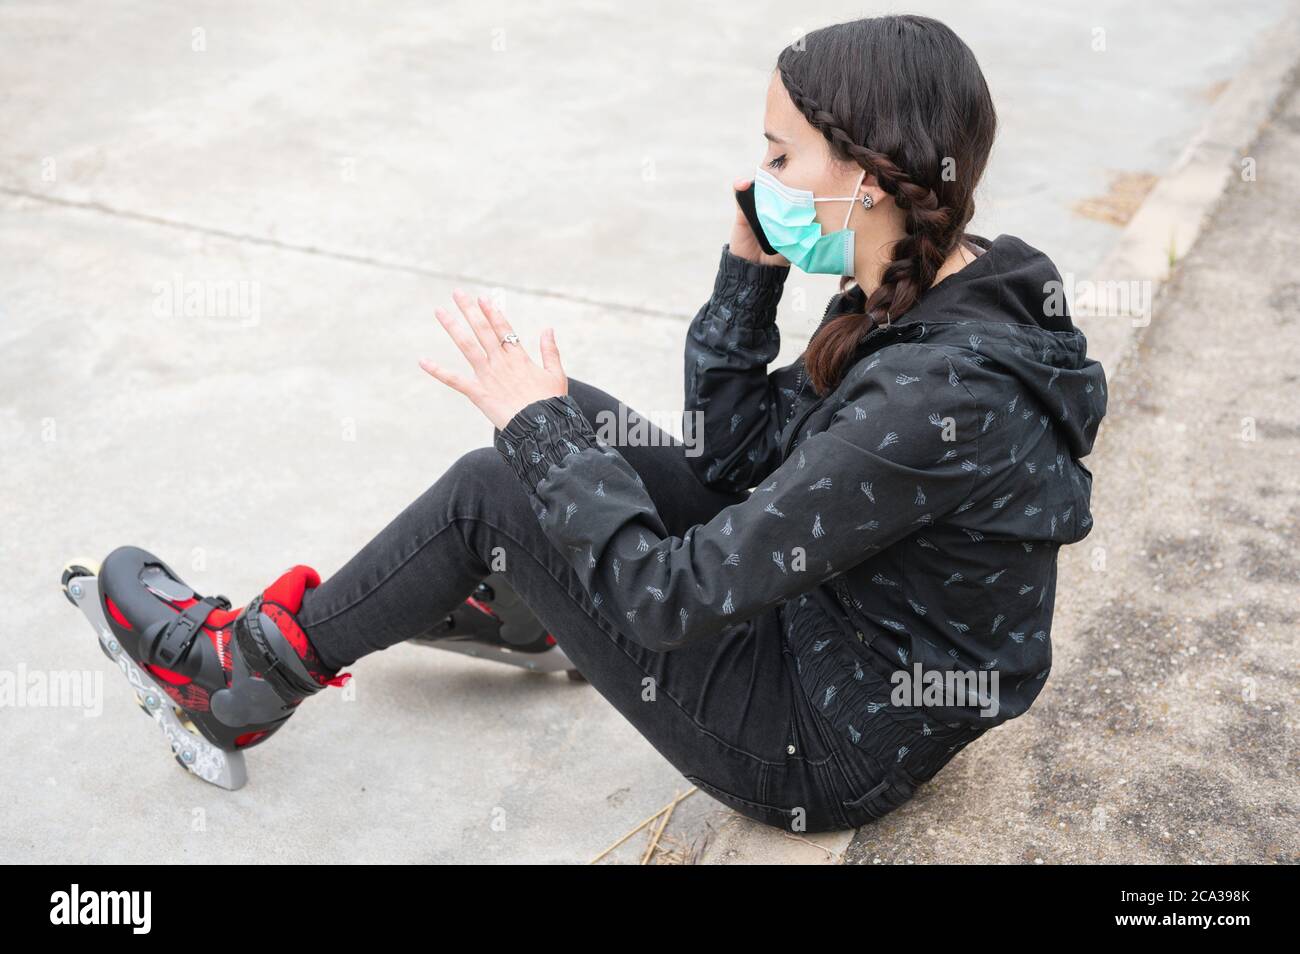 Woman in protective face mask on roller skating pause, sitting on the street and using mobile phone during coronavirus pandemic outbreak. Urban Girl Stock Photo